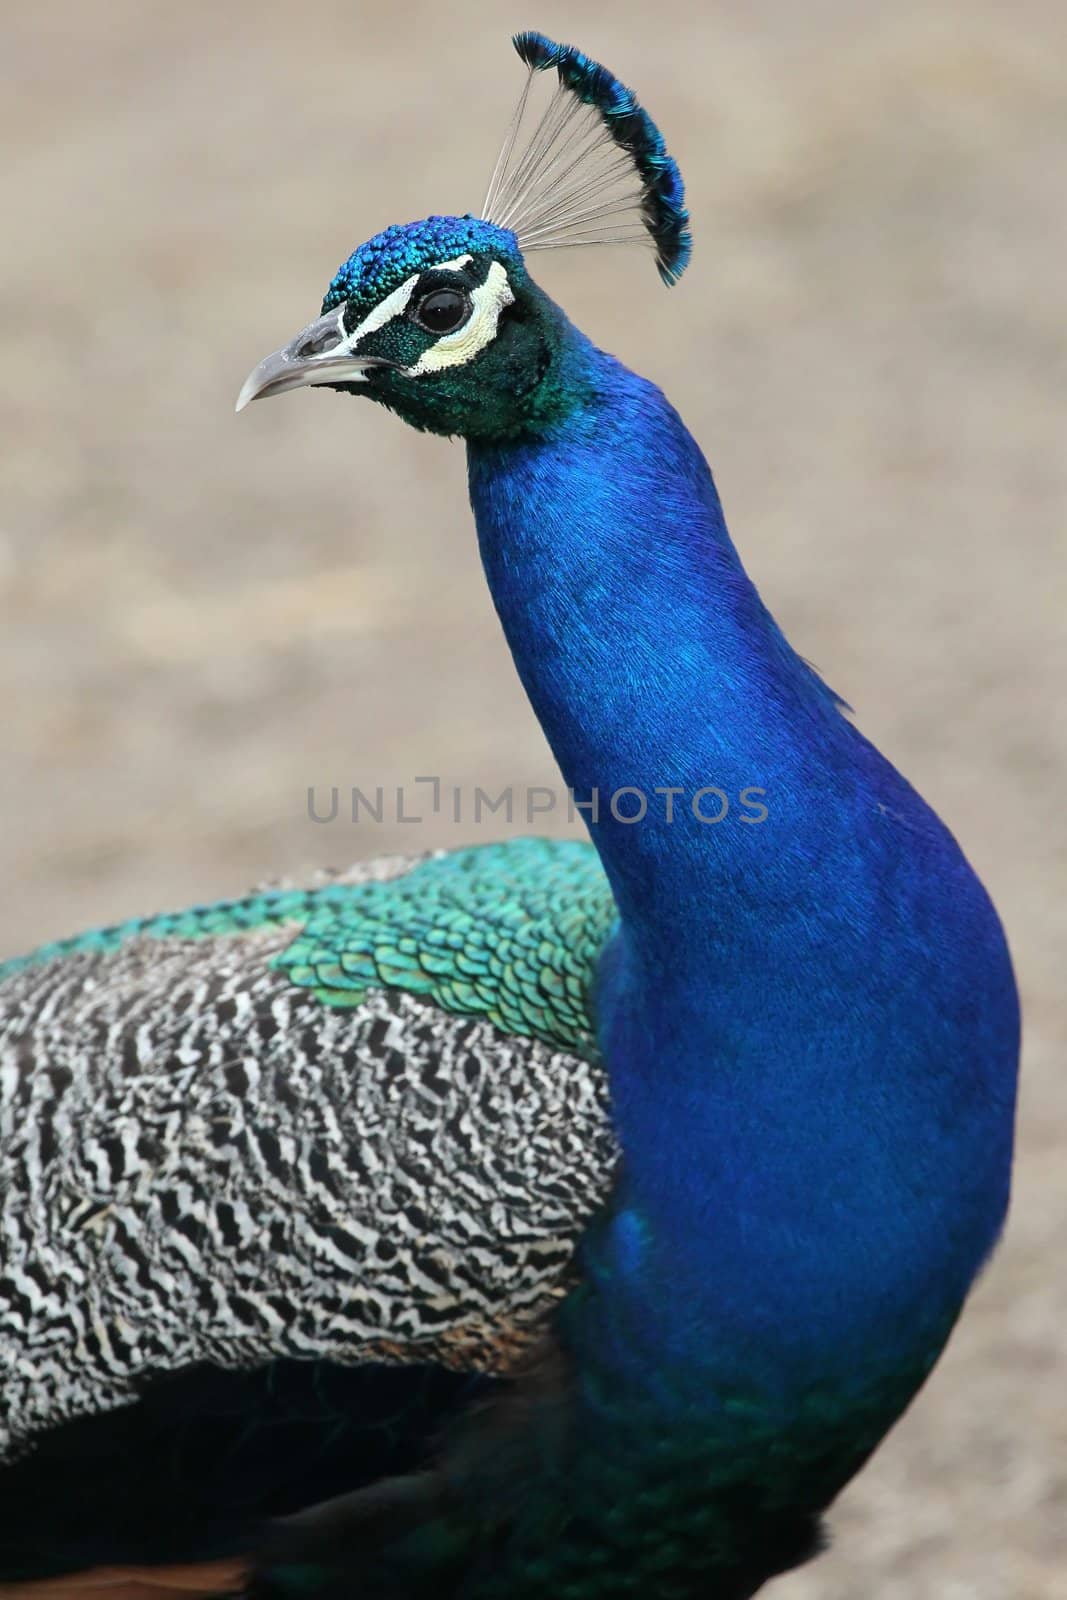 Magnificent Indian peacock bird with bright blue plumage